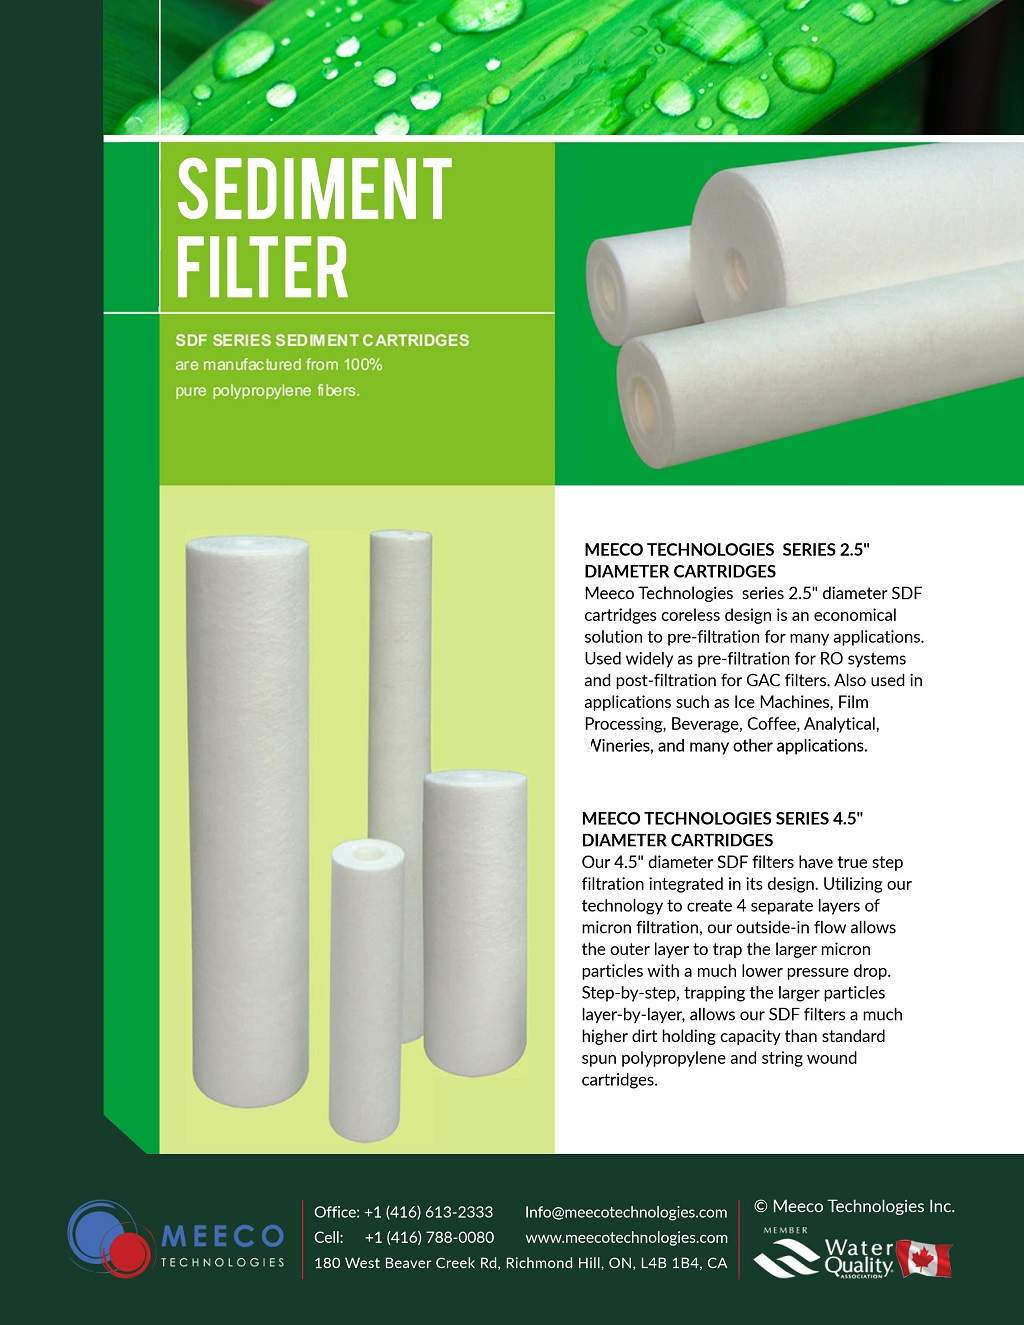 5 Micron Sediment Filter, This 5micron sediment filter is made of 100% pure polypropylene fibers. High capacity filter removes dusts, particles and rusts.